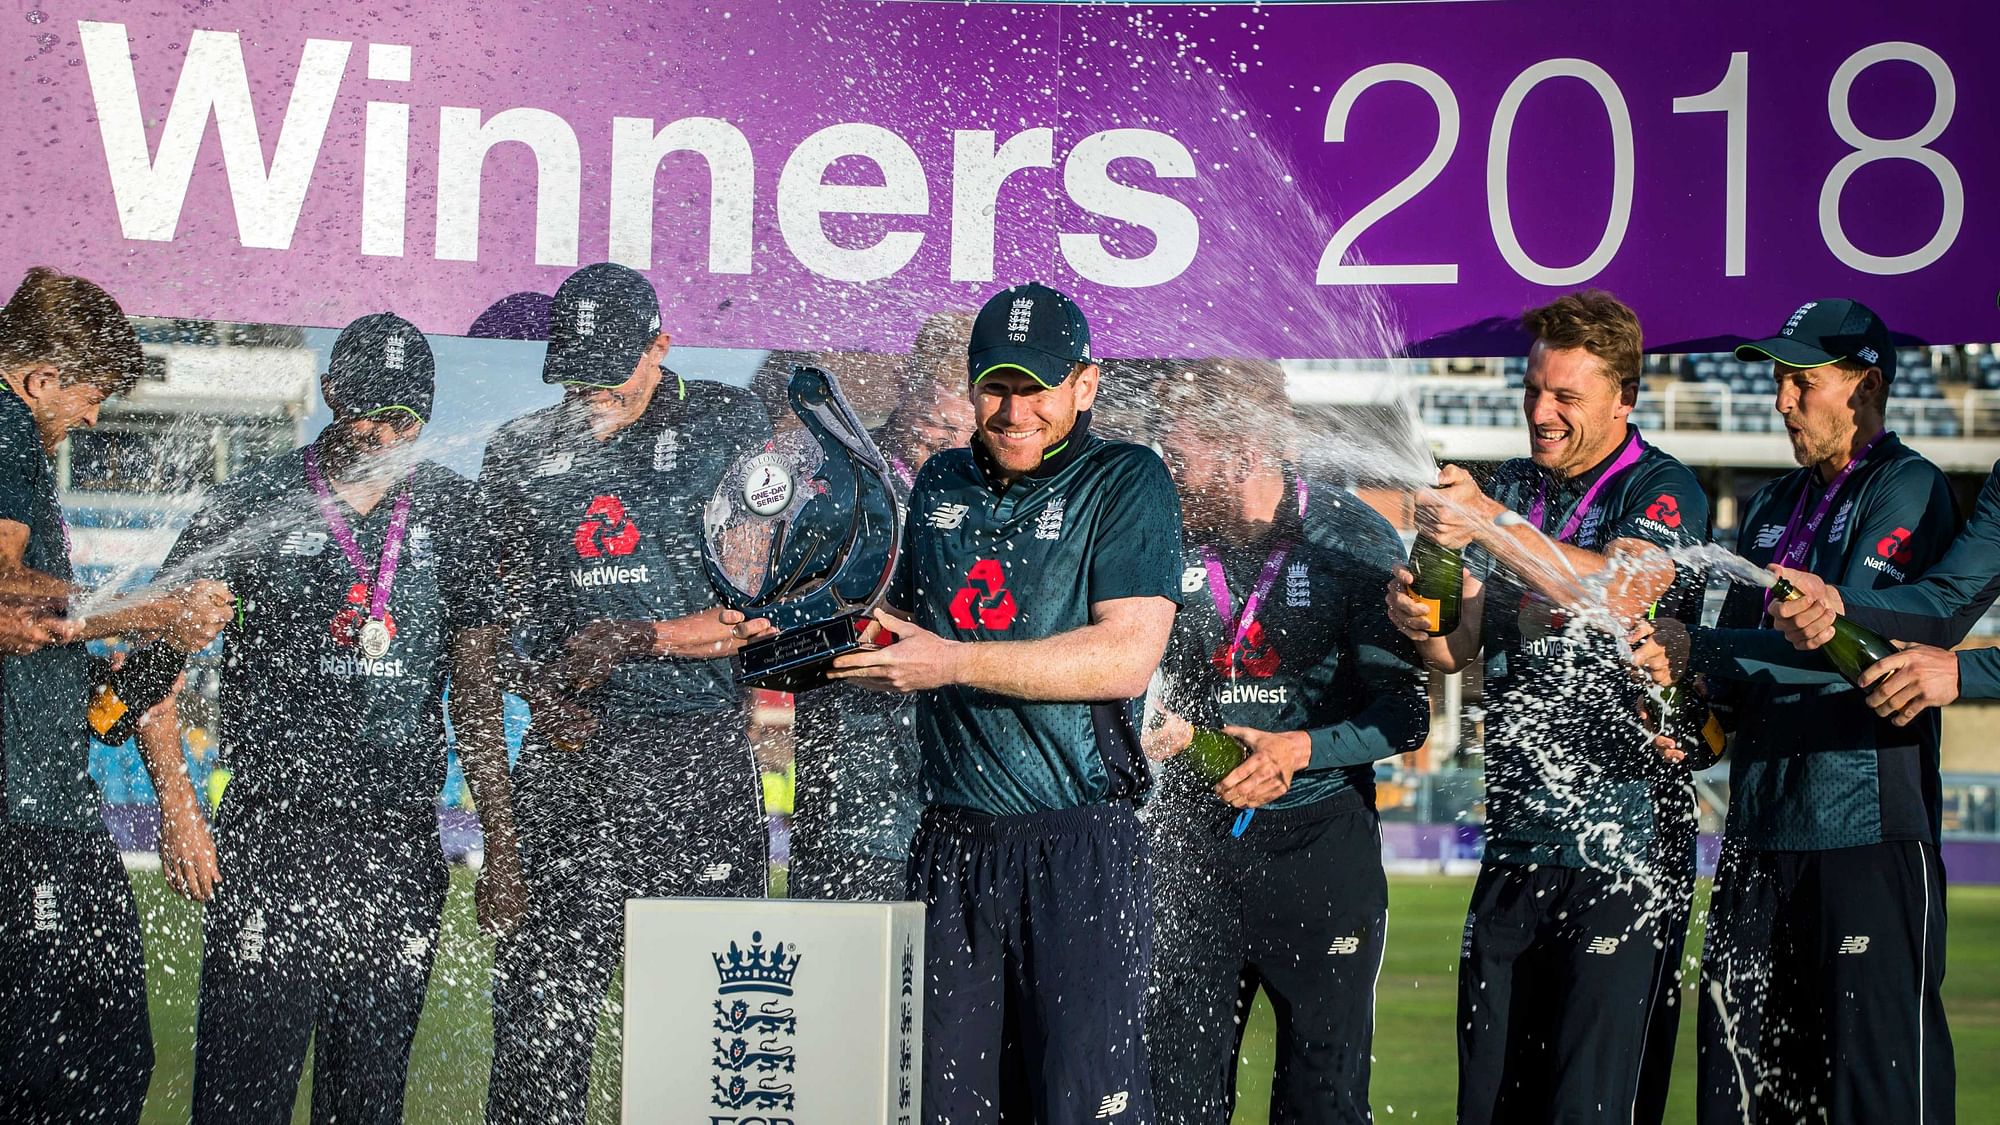 Eoin Morgan holds the trophy as he celebrates winning the series with team mates following the third Royal London One Day international at Emerald Headingley, Leeds.